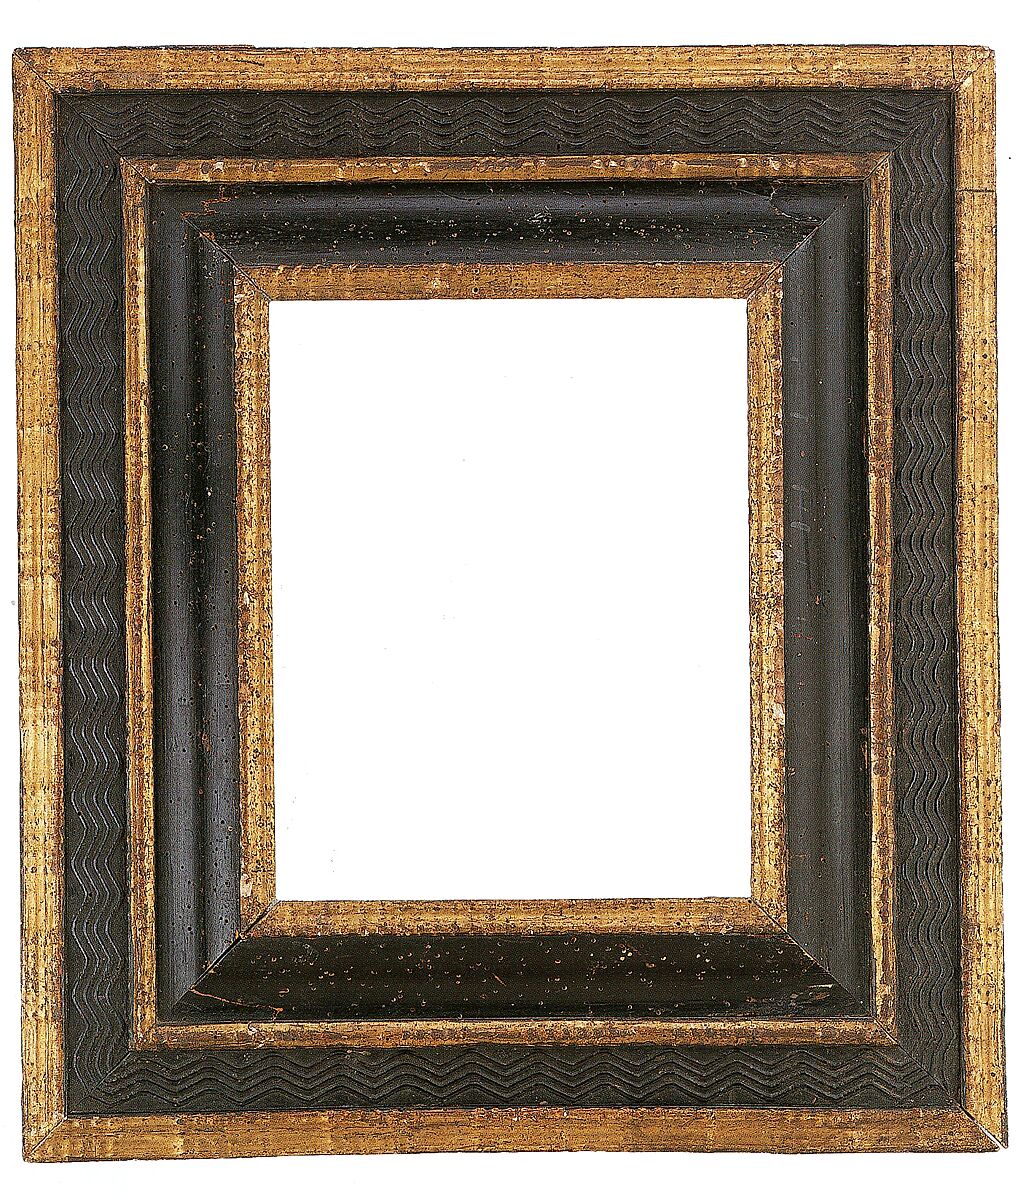 Reverse ripple frame, Pine, Southern Italy (?) 